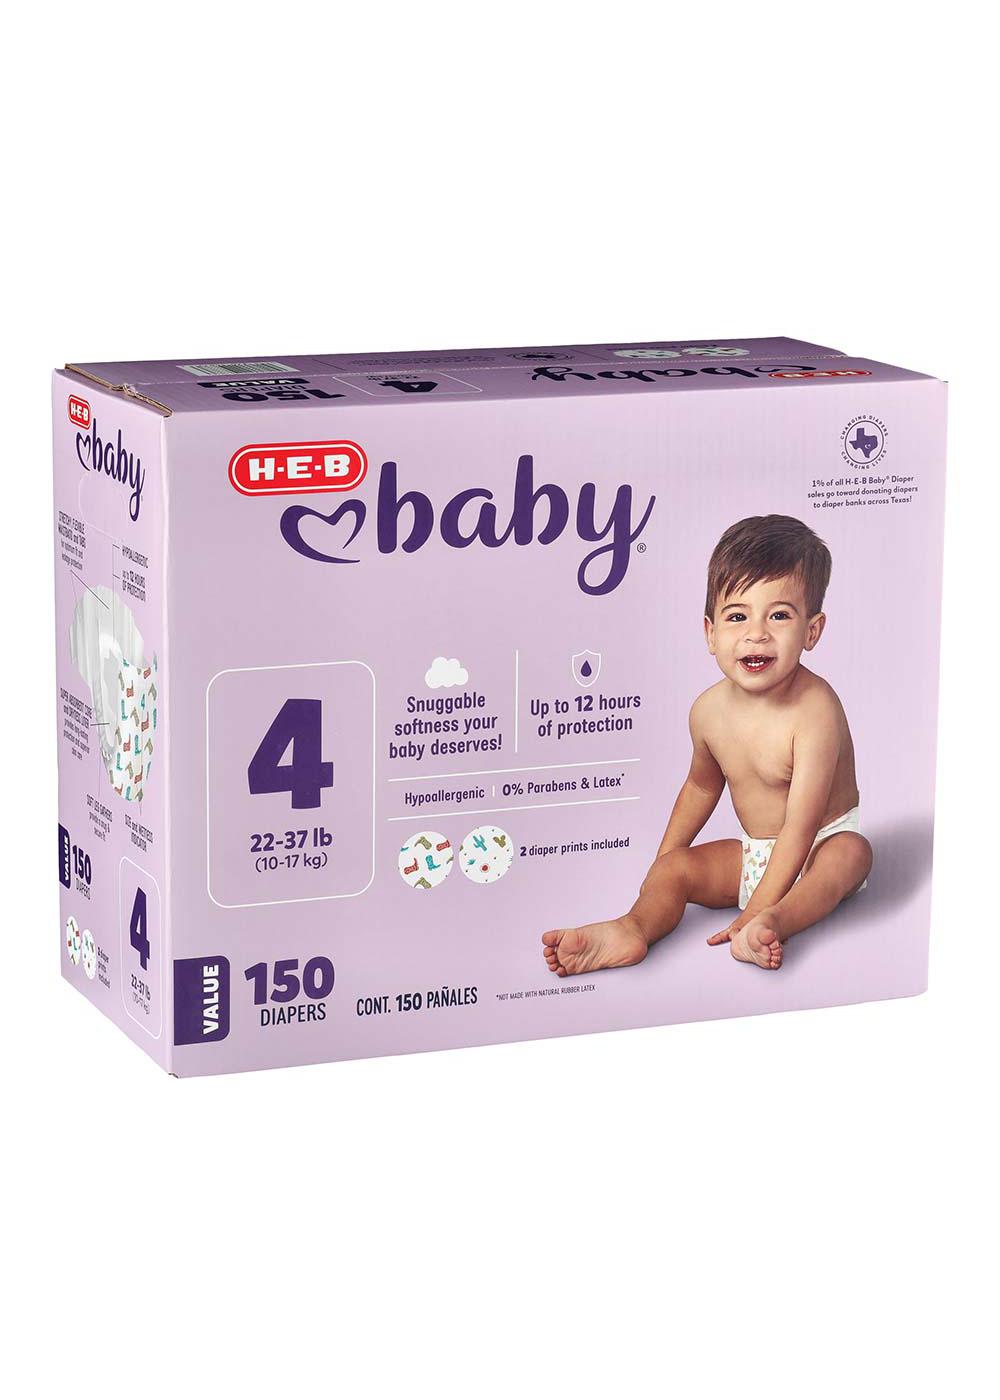 H-E-B Baby Value Pack Diapers - Size 4; image 1 of 3